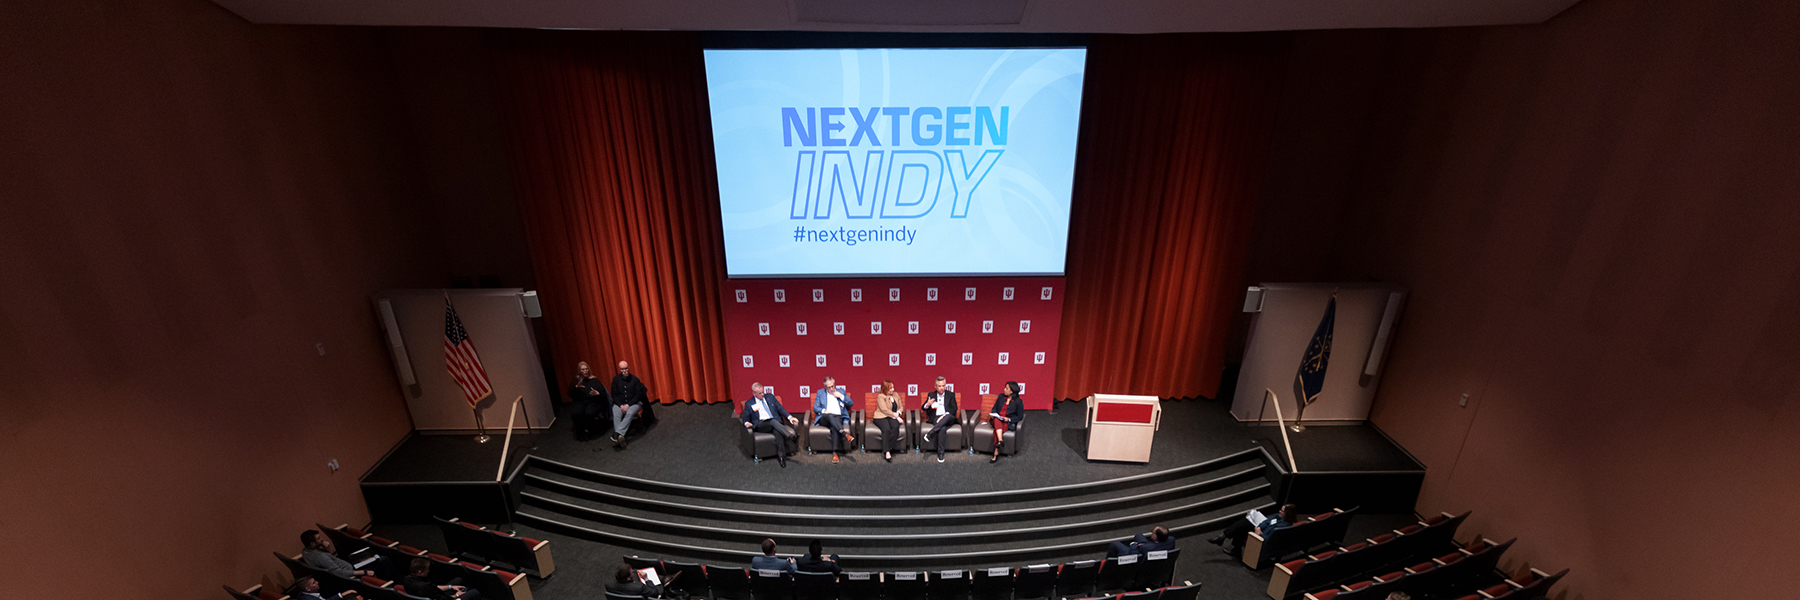 An aerial view of an auditorium stage with IU panelists